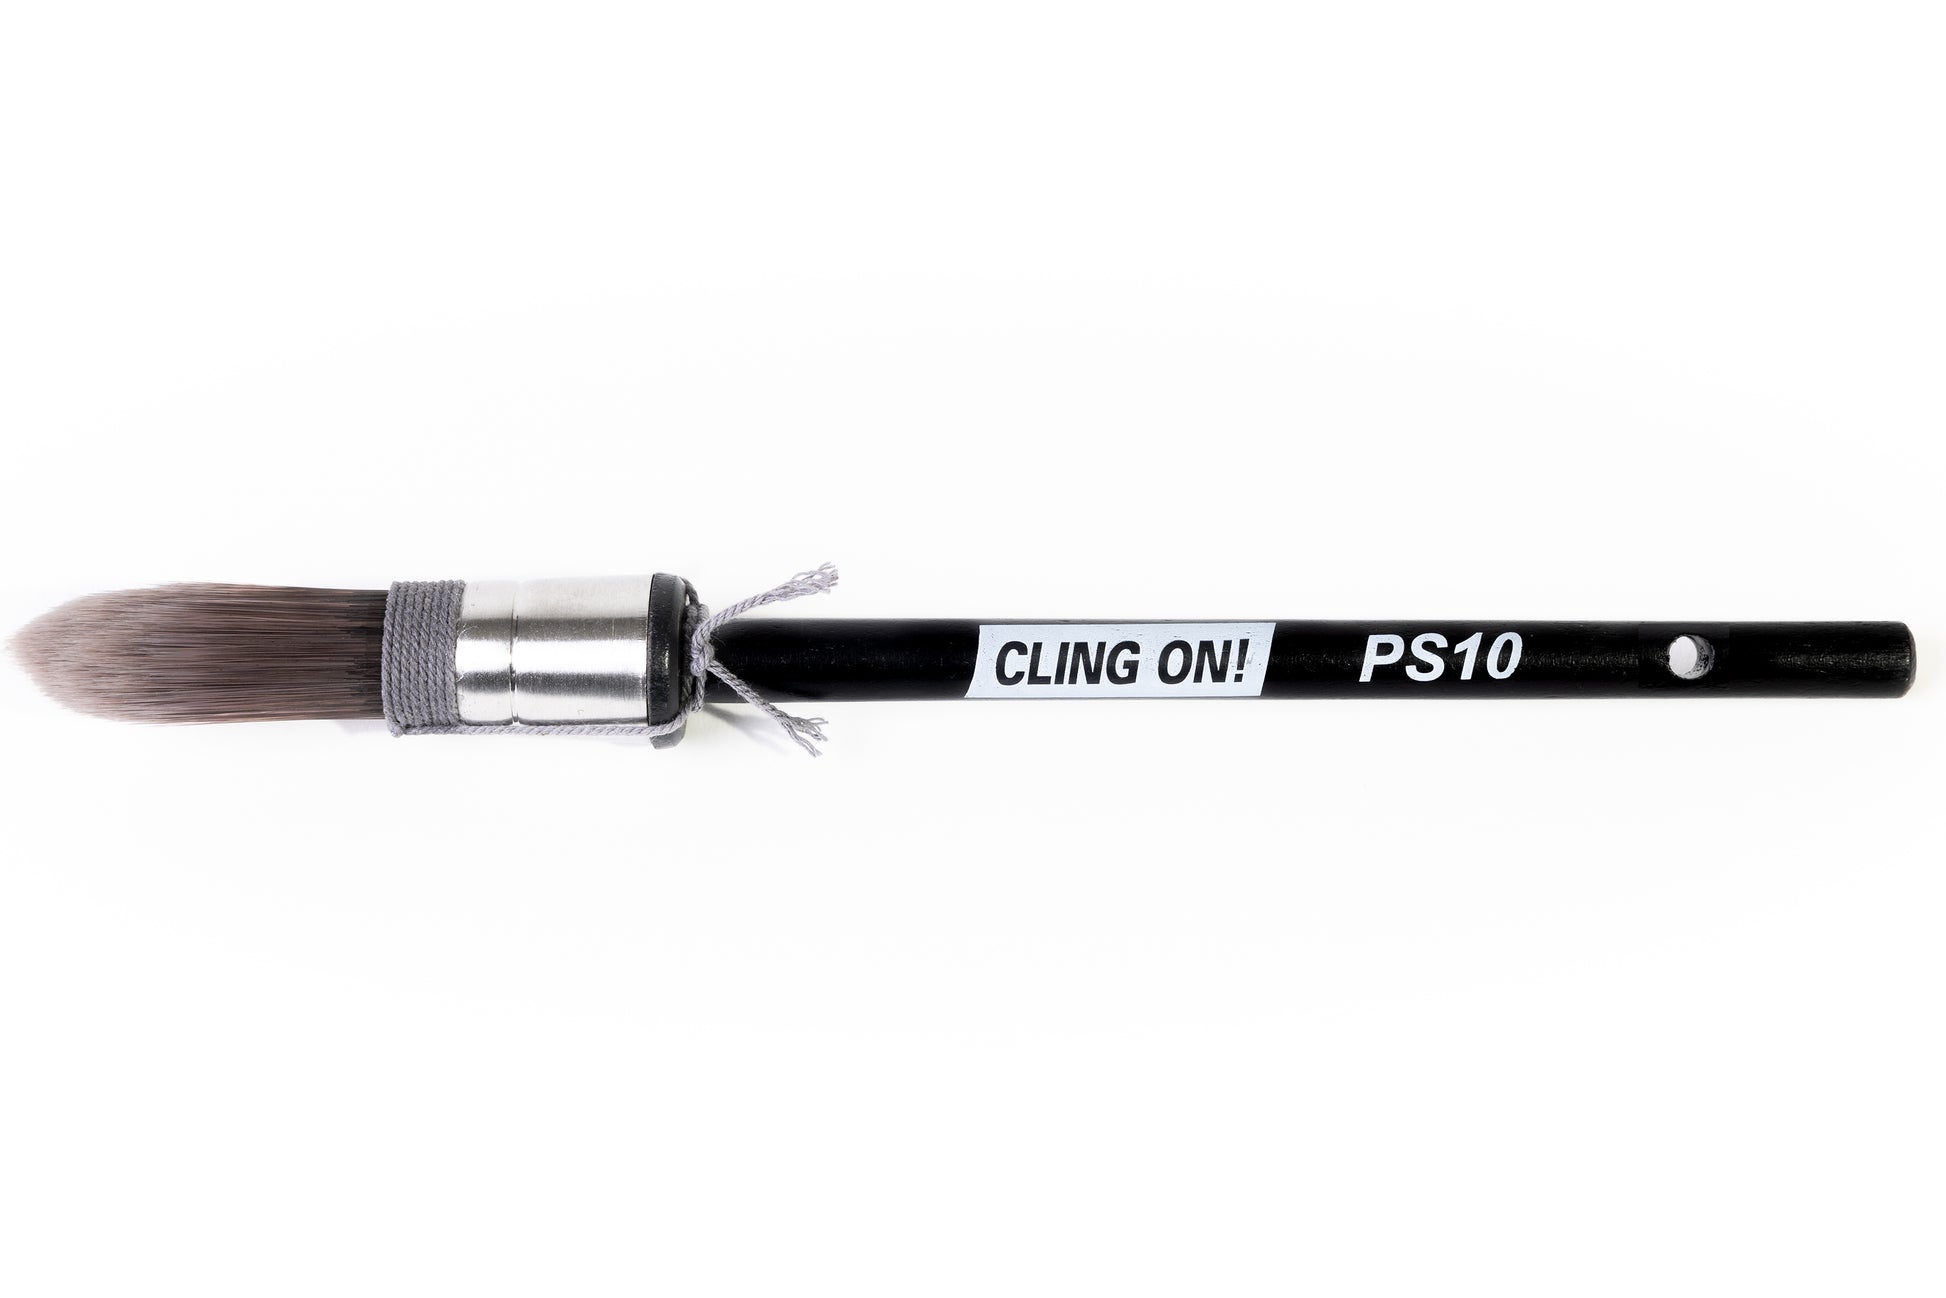 Cling On Brush POINTY | copy-of-cling-on-brush-flat | Cling On!